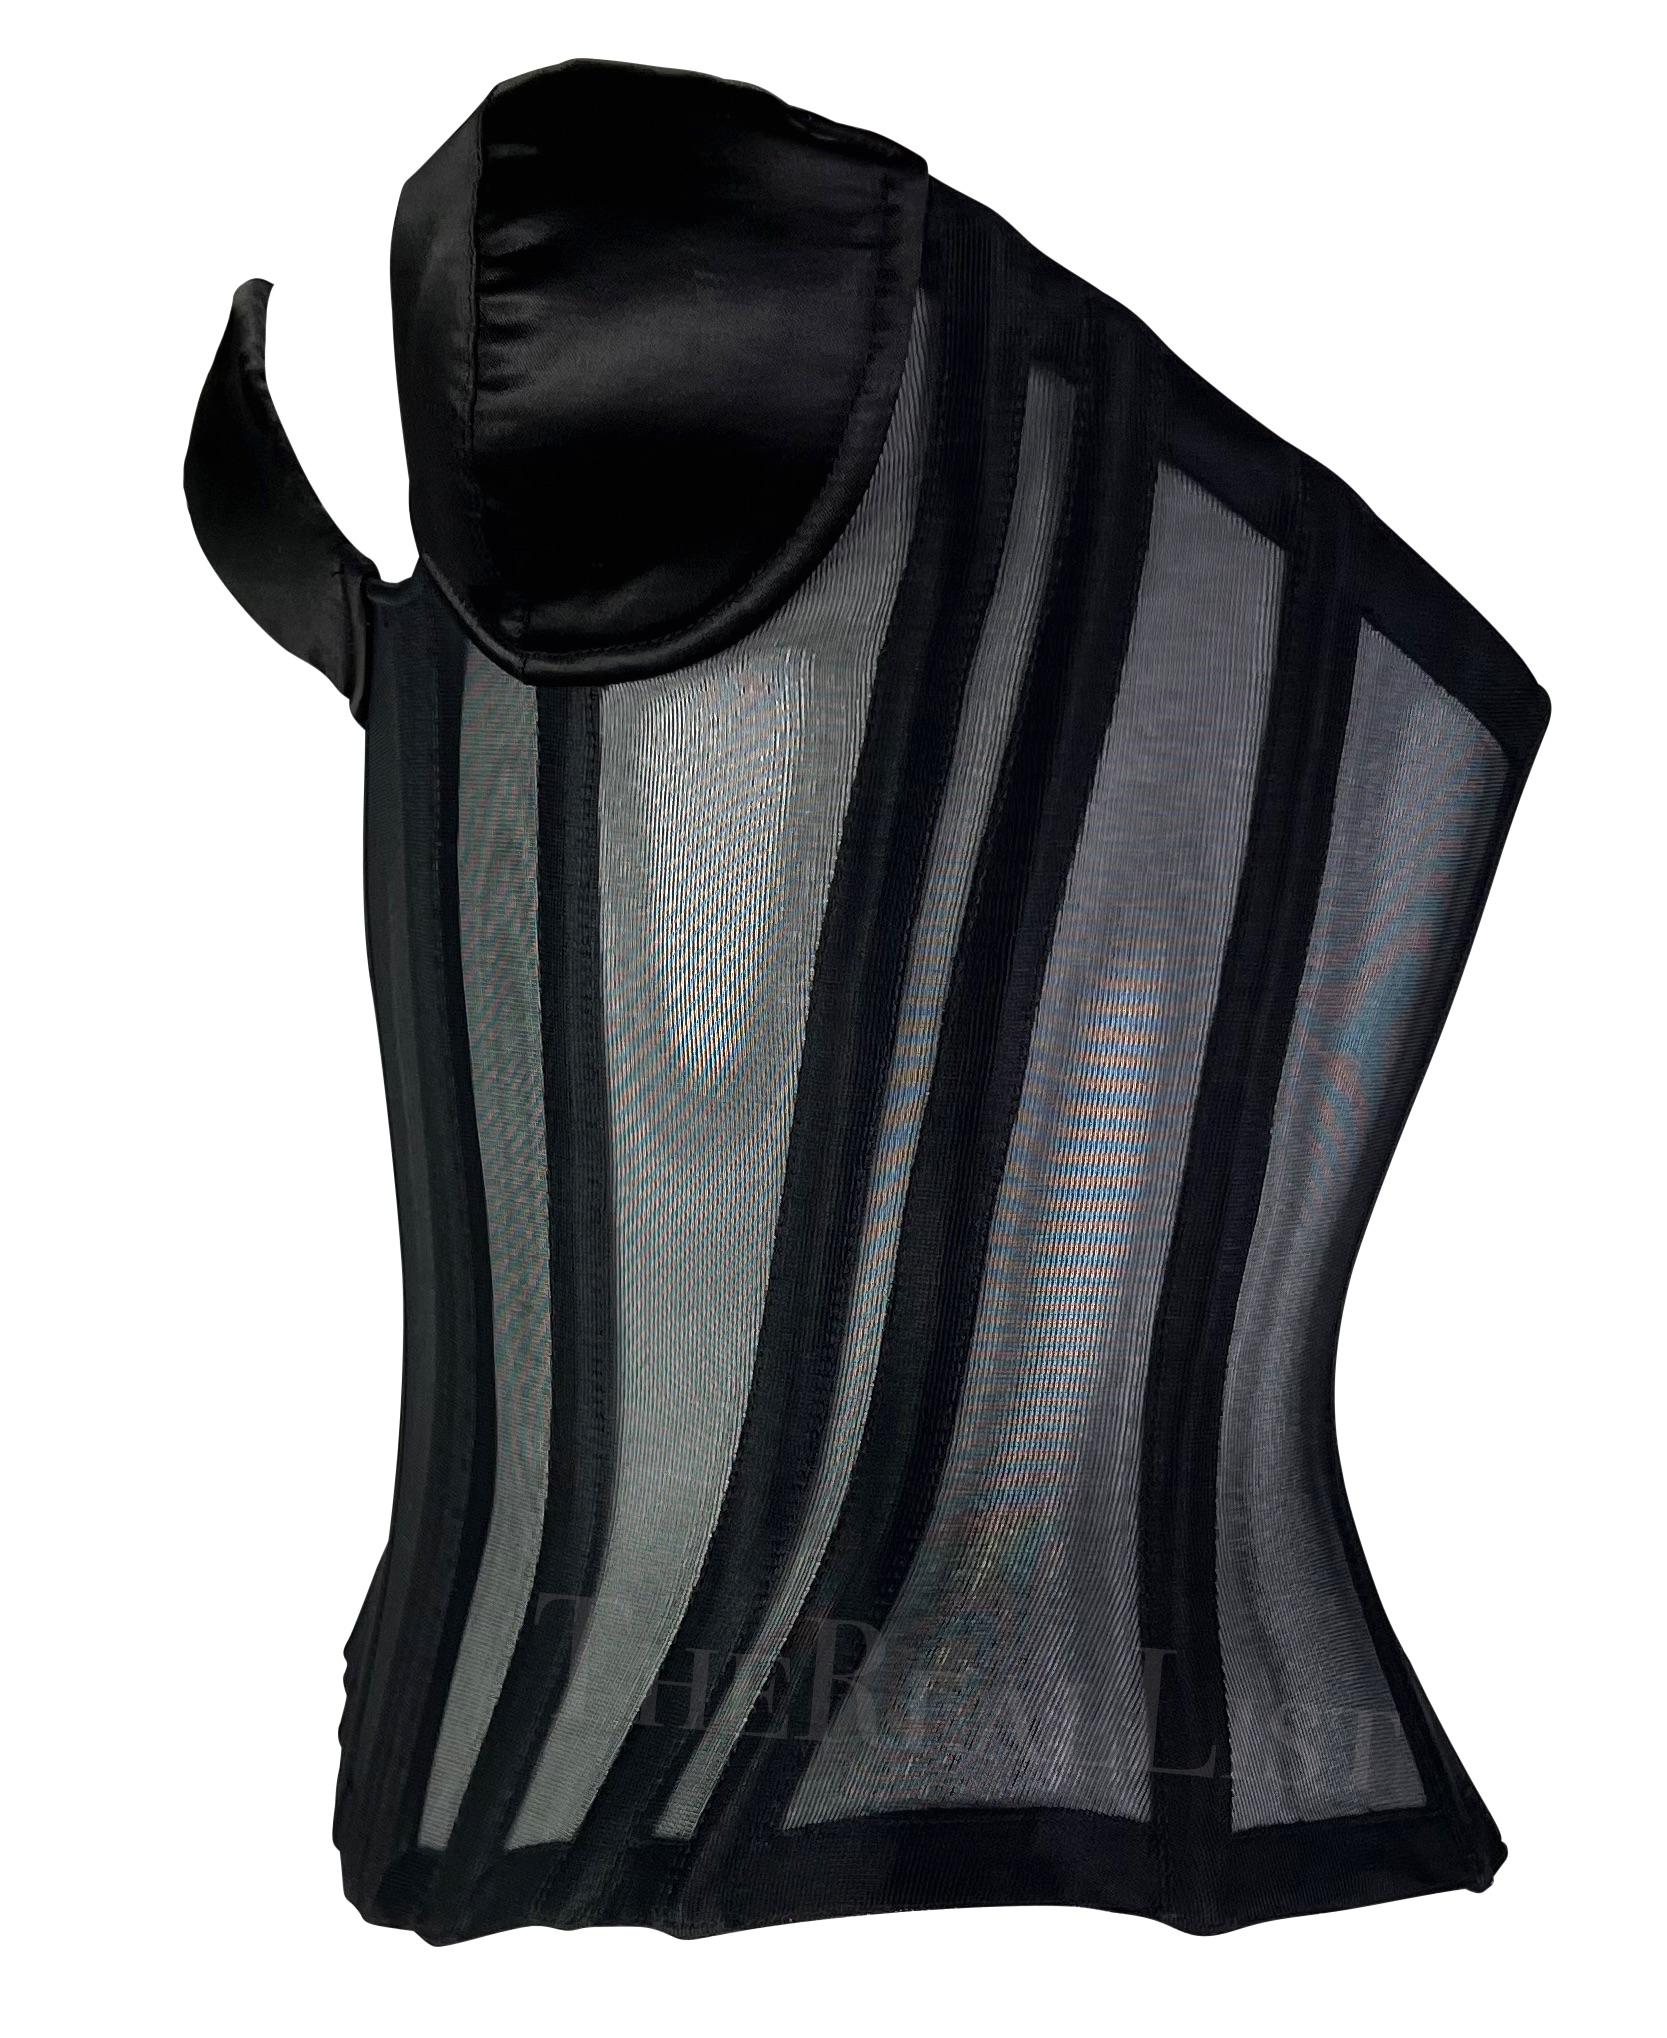 Late 1990s Thierry Mugler Lace-Up Sheer Black Satin Mr. Pearl Corset In Excellent Condition For Sale In West Hollywood, CA